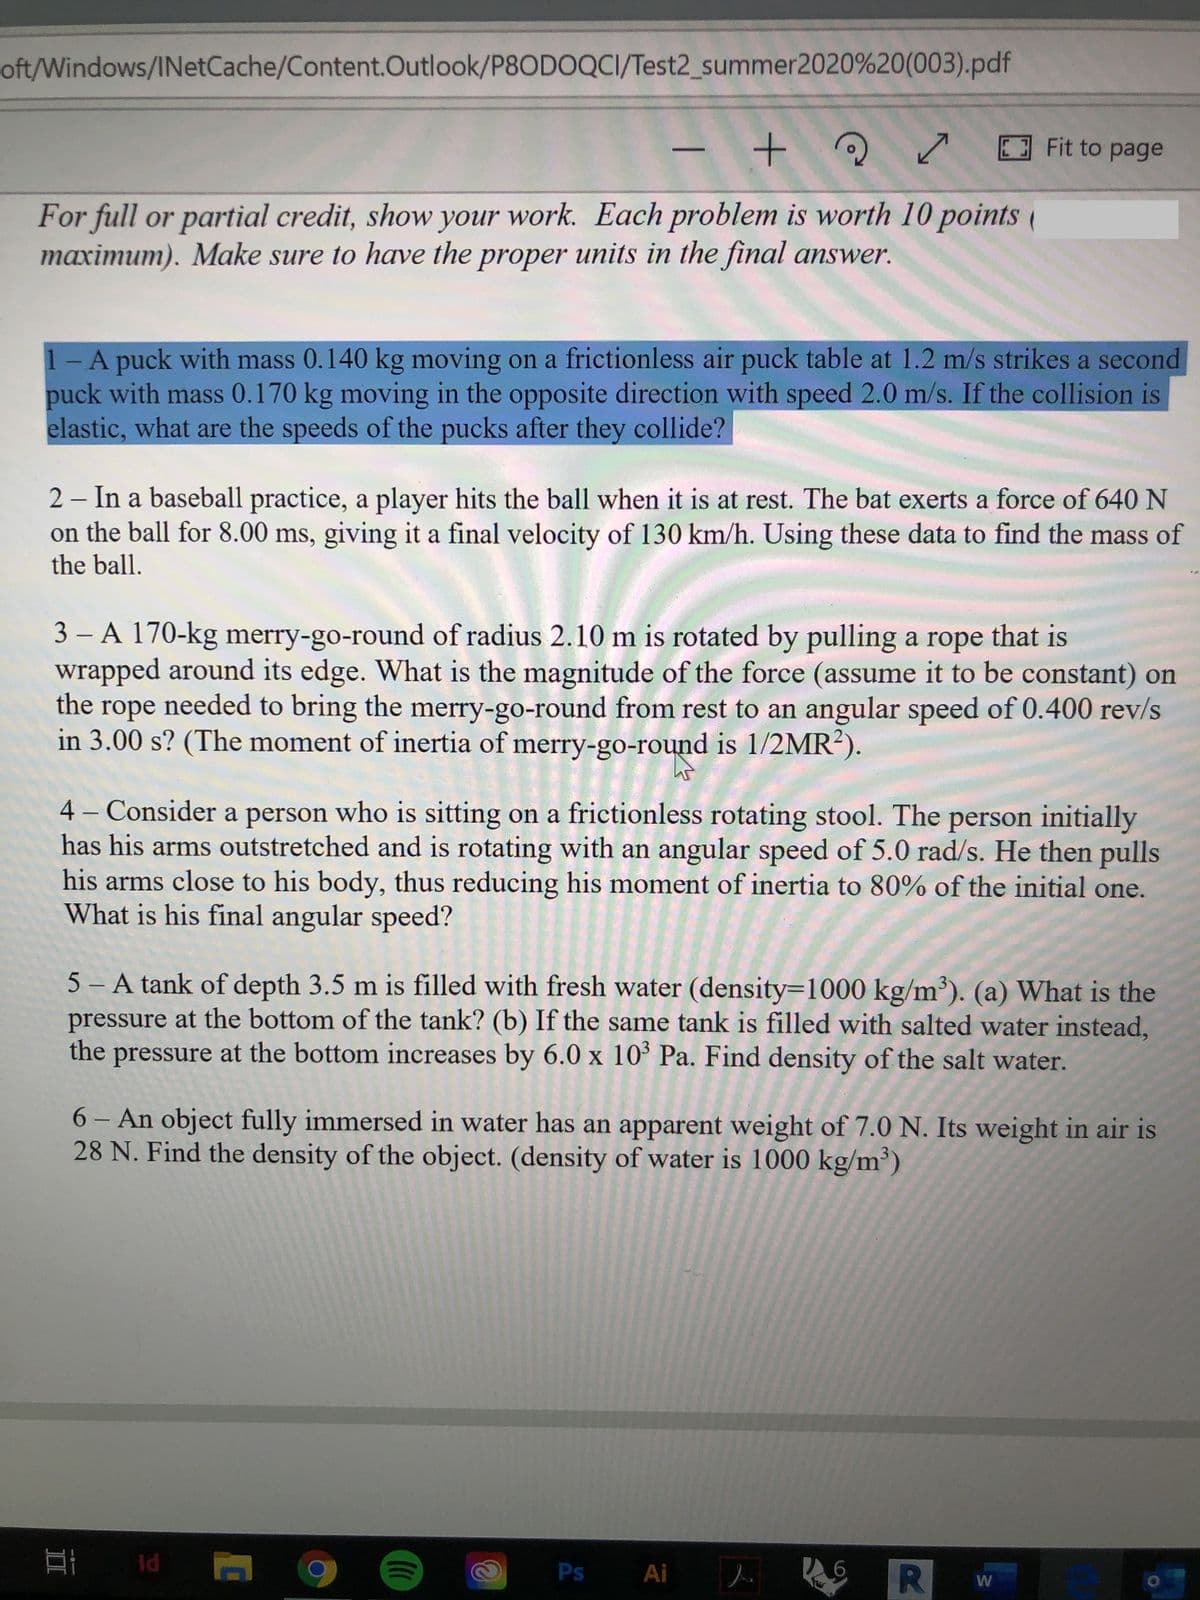 oft/Windows/INetCache/Content.Outlook/P8ODOQCI/Test2_summer2020%20(003).pdf
E Fit to page
For full or partial credit, show your work. Each problem is worth 10 points (
maximum). Make sure to have the proper units in the final answer.
1-A puck with mass 0.140 kg moving on a frictionless air puck table at 1.2 m/s strikes a second
puck with mass 0.170 kg moving in the opposite direction with speed 2.0 m/s. If the collision is
elastic, what are the speeds of the pucks after they collide?
2 - In a baseball practice, a player hits the ball when it is at rest. The bat exerts a force of 640 N
on the ball for 8.00 ms, giving it a final velocity of 130 km/h. Using these data to find the mass of
the ball.
3 - A 170-kg merry-go-round of radius 2.10 m is rotated by pulling a rope that is
wrapped around its edge. What is the magnitude of the force (assume it to be constant) on
the rope needed to bring the merry-go-round from rest to an angular speed of 0.400 rev/s
in 3.00 s? (The moment of inertia of merry-go-round is 1/2MR²).
4 – Consider a person who is sitting on a frictionless rotating stool. The person initially
has his arms outstretched and is rotating with an angular speed of 5.0 rad/s. He then pulls
his arms close to his body, thus reducing his moment of inertia to 80% of the initial one.
What is his final angular speed?
5 – A tank of depth 3.5 m is filled with fresh water (density=1000 kg/m³). (a) What is the
pressure at the bottom of the tank? (b) If the same tank is filled with salted water instead,
the
pressure at the bottom increases by 6.0 x 10ʻ Pa. Find density of the salt water.
6 - An object fully immersed in water has an apparent weight of 7.0 N. Its weight in air is
28 N. Find the density of the object. (density of water is 1000 kg/m³)
Id
Ps Ai
W
